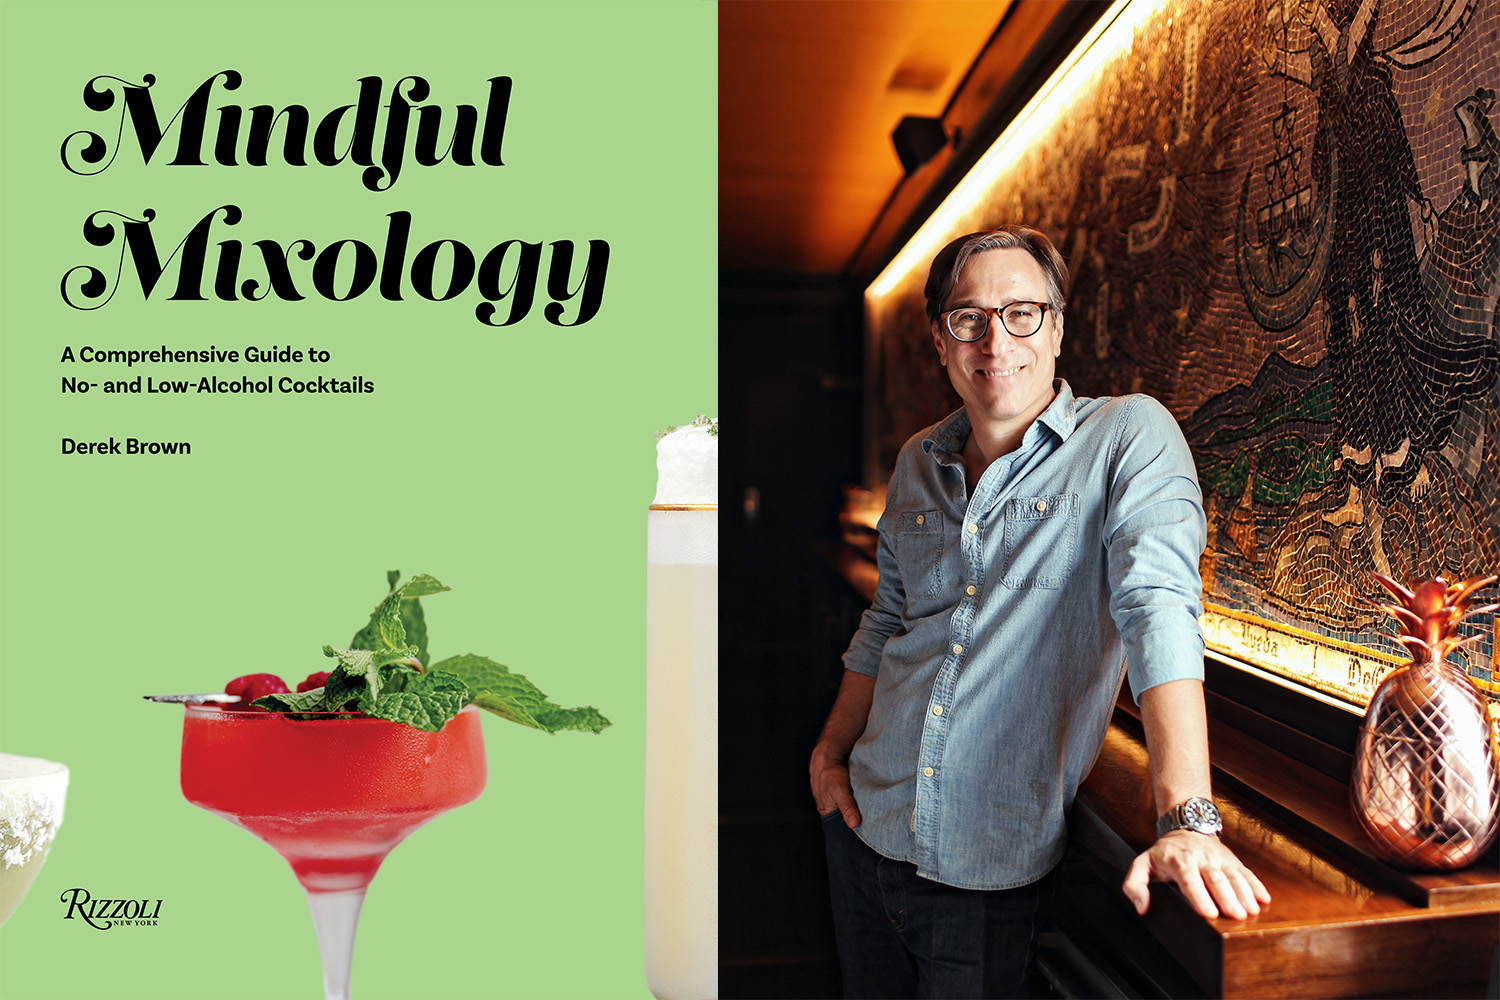 15 Best Cocktail Books to Buy in 2022 - Mixology & Cocktail Recipe Books